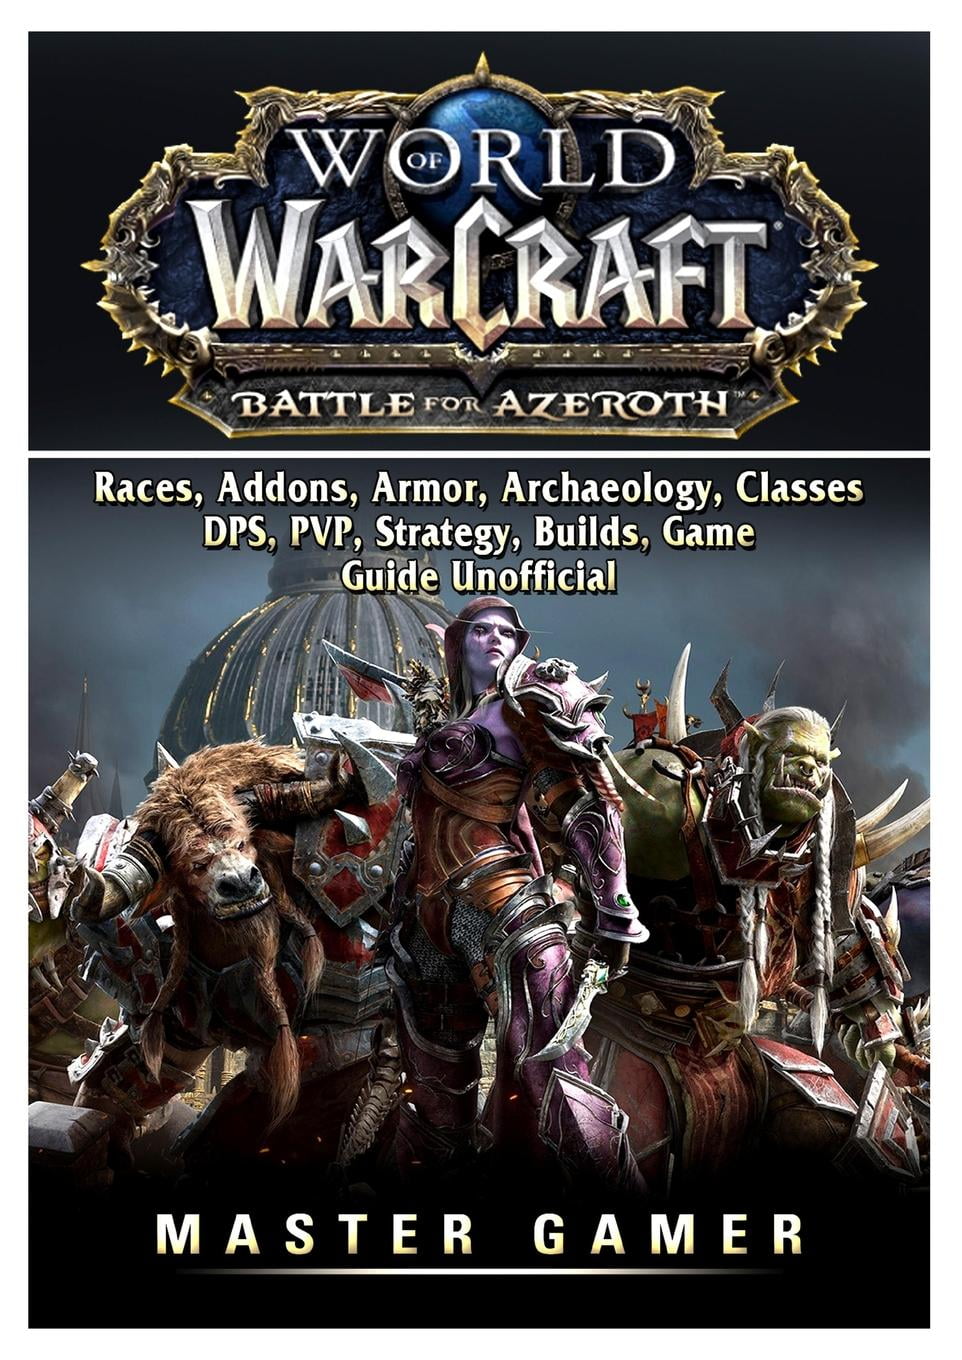 World Of Warcraft Battle For Azeroth Races Addons Armor Archaeology Classes Dps Pvp Strategy Builds Game Guide Unofficial Paperback Walmart Com Walmart Com